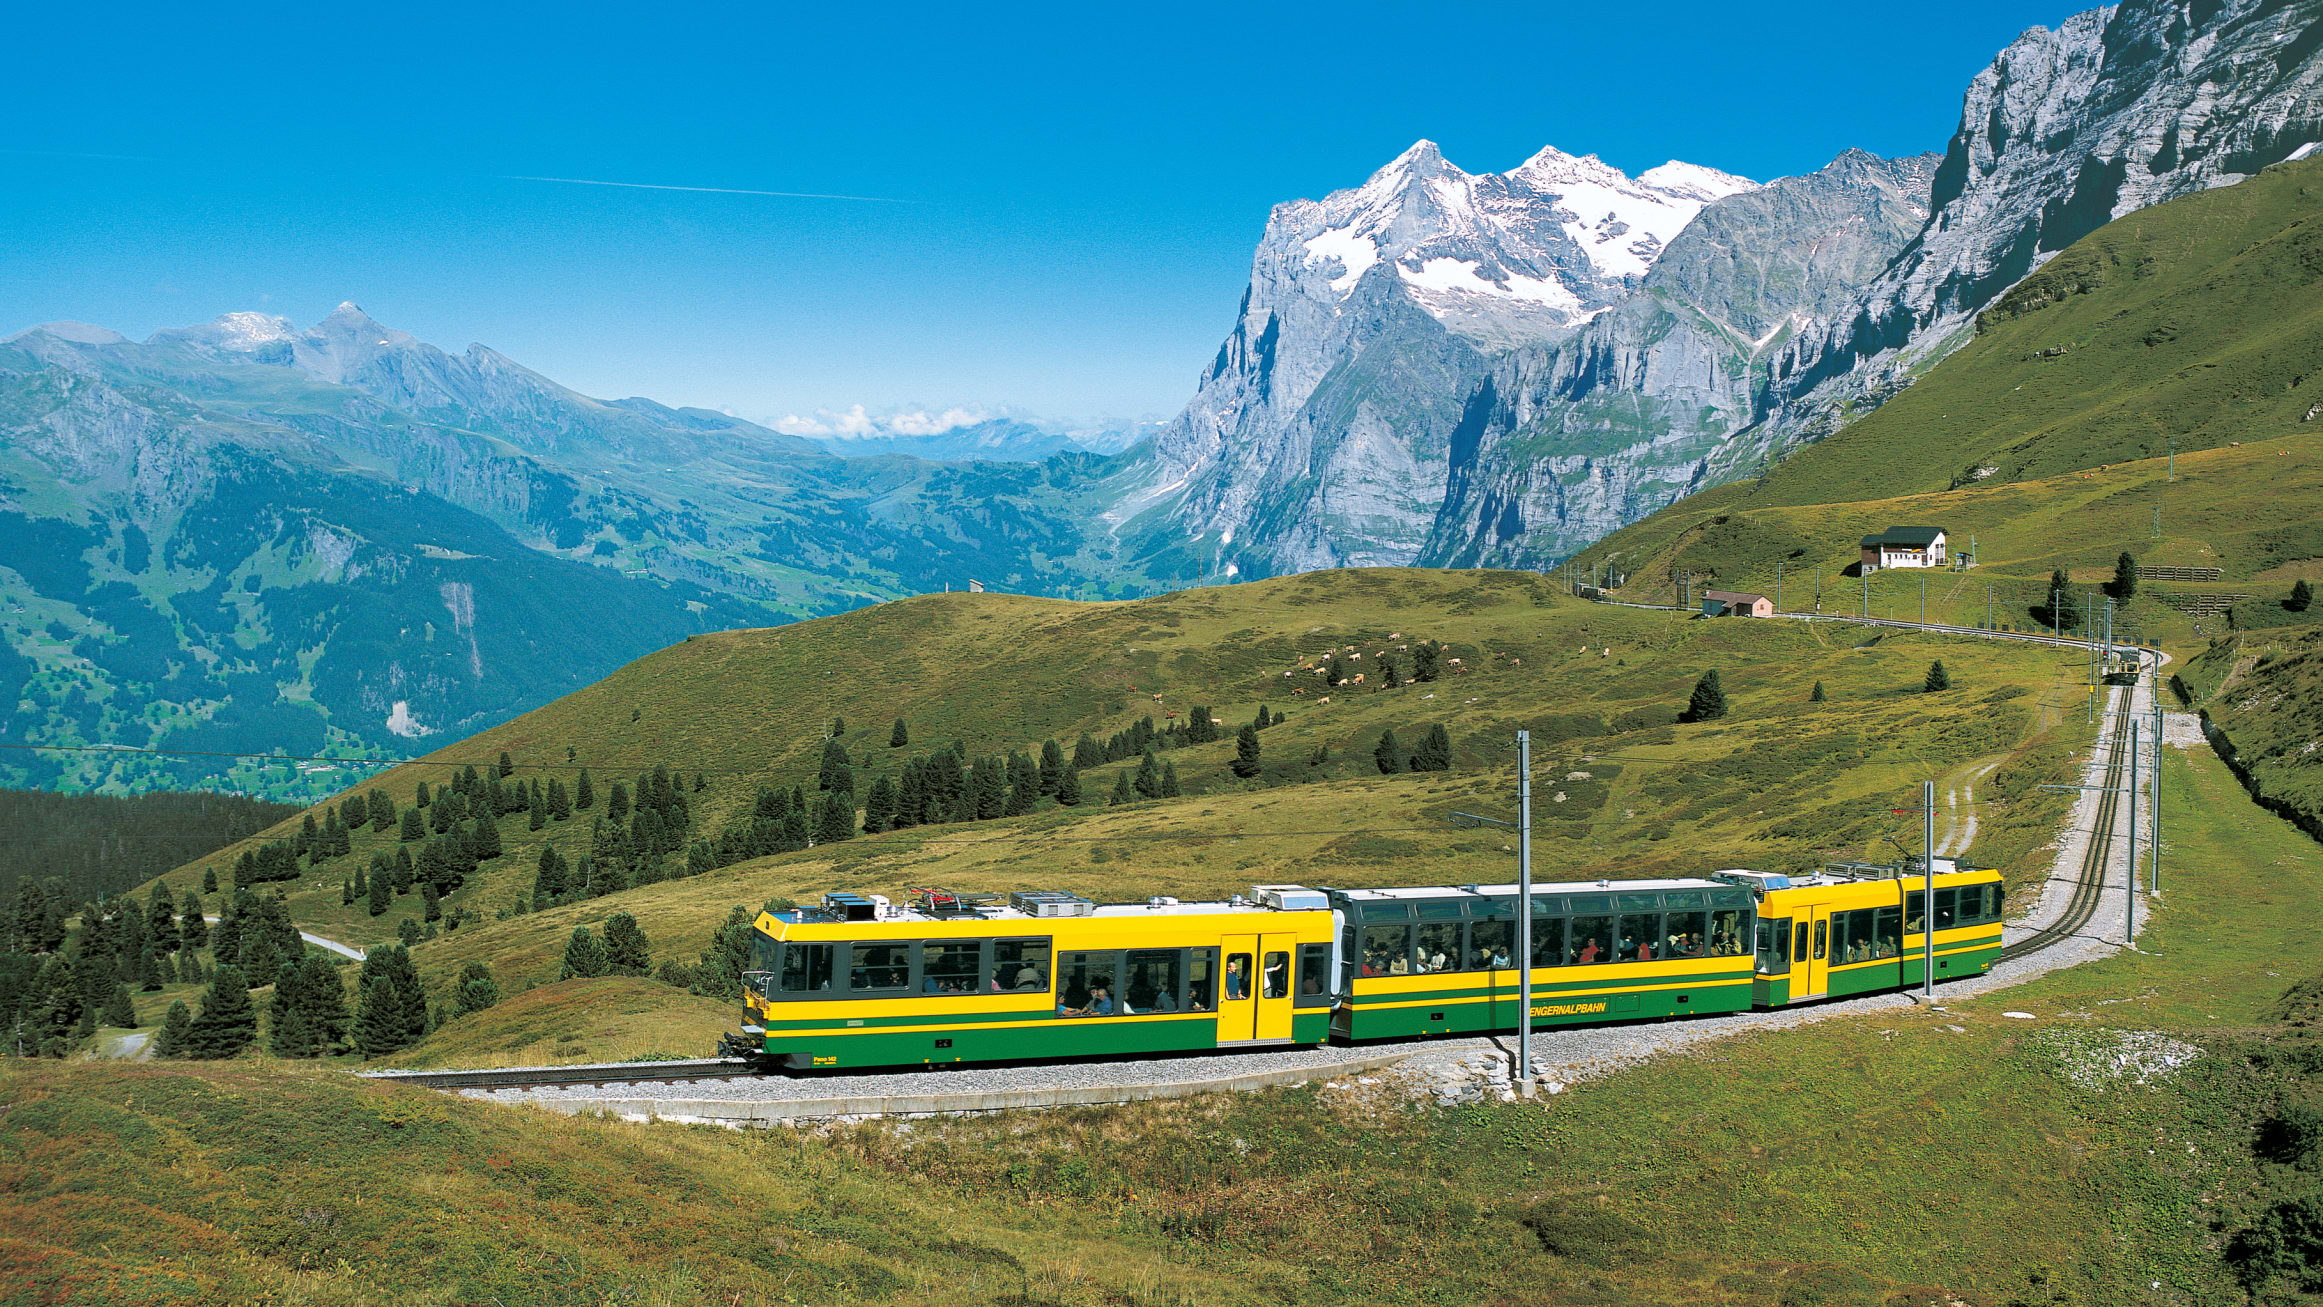 Pictures | jungfrau.ch